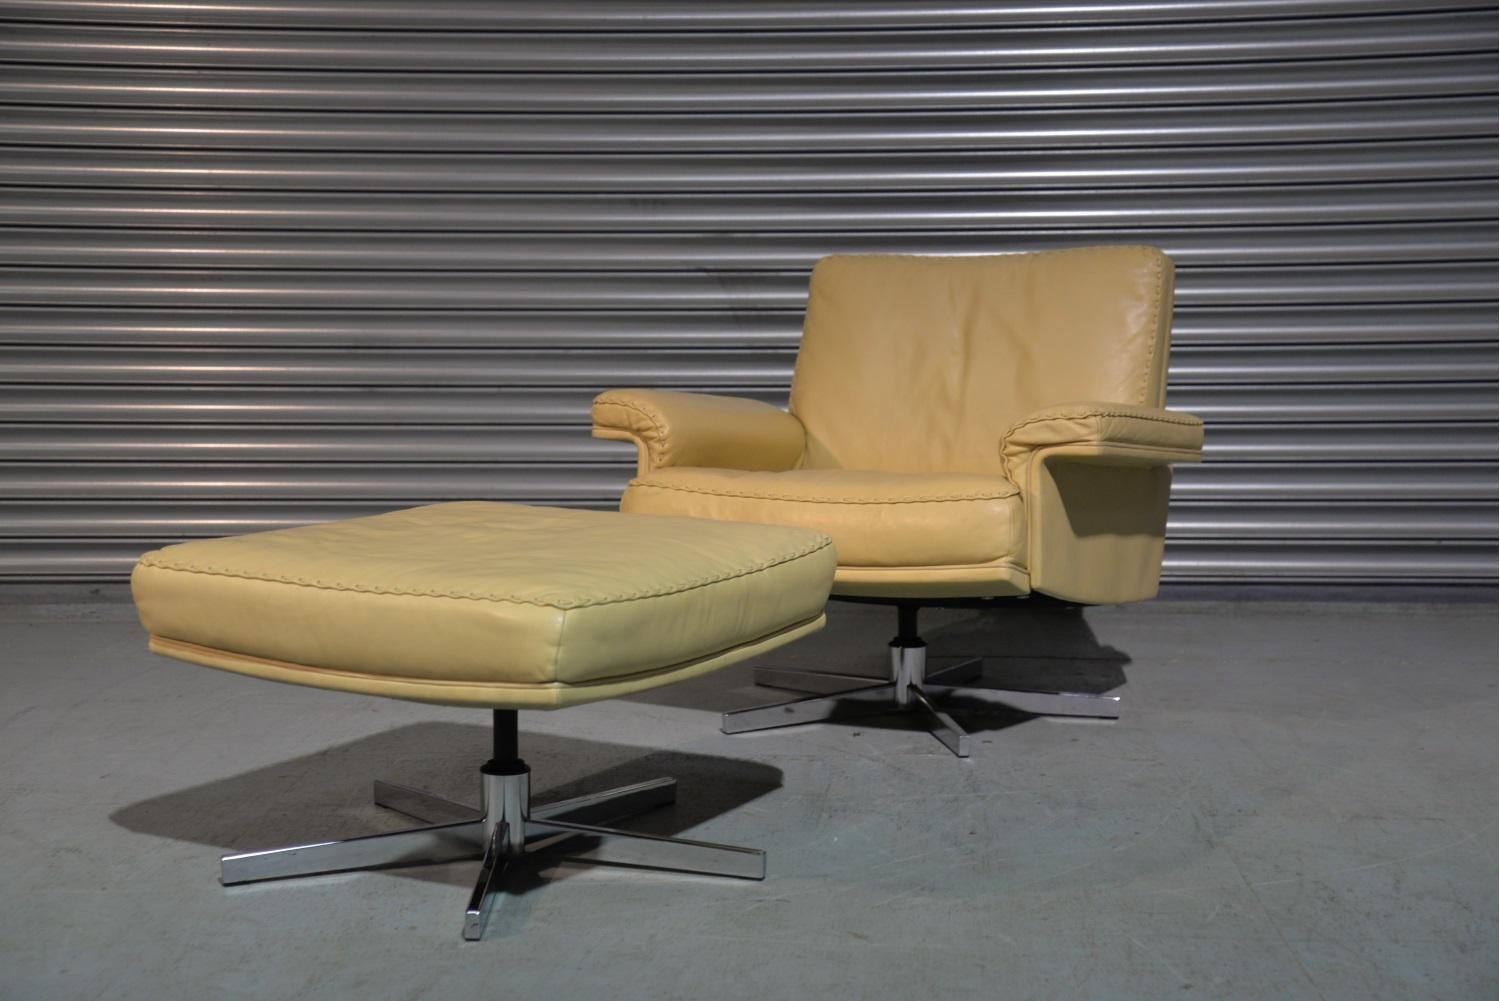 Discounted airfreight for our US and International customers (from 2 weeks door to door)

We are delighted to bring to you a highly desirable and ultra rare vintage De Sede DS 35 swivel lounge armchair with ottoman hand built in the early 1970s by